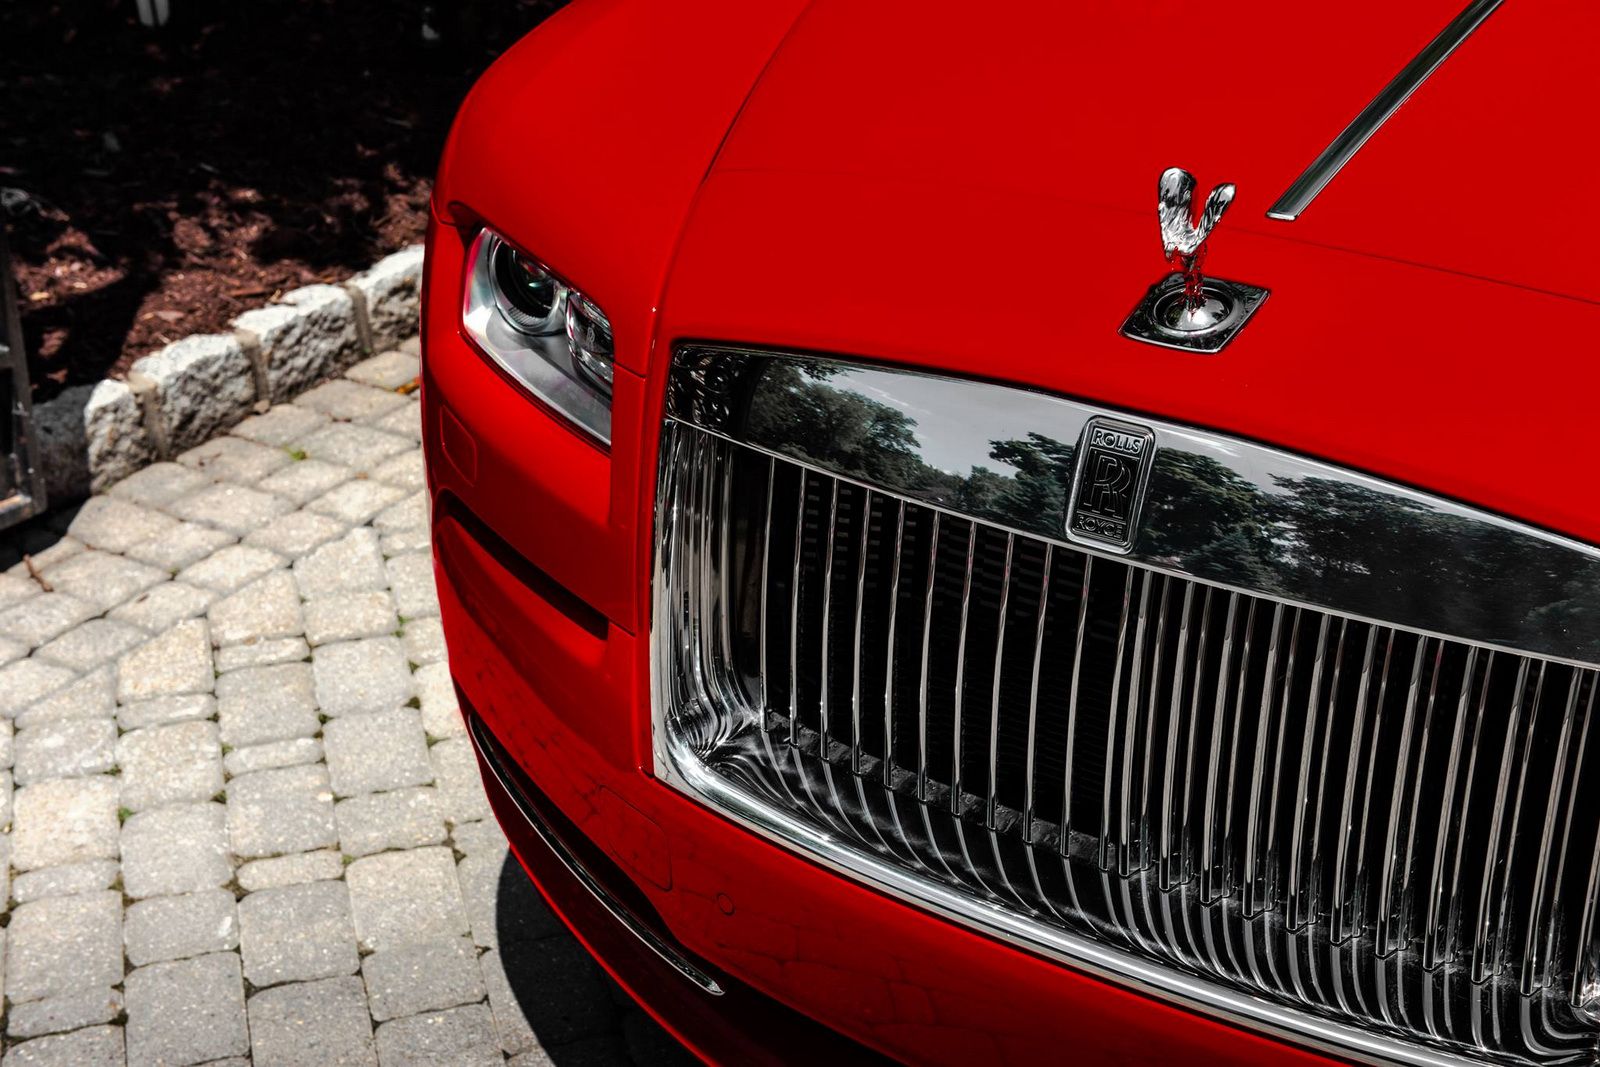 Bespoke St. James Wraith Is A Very Red Rolls Royce